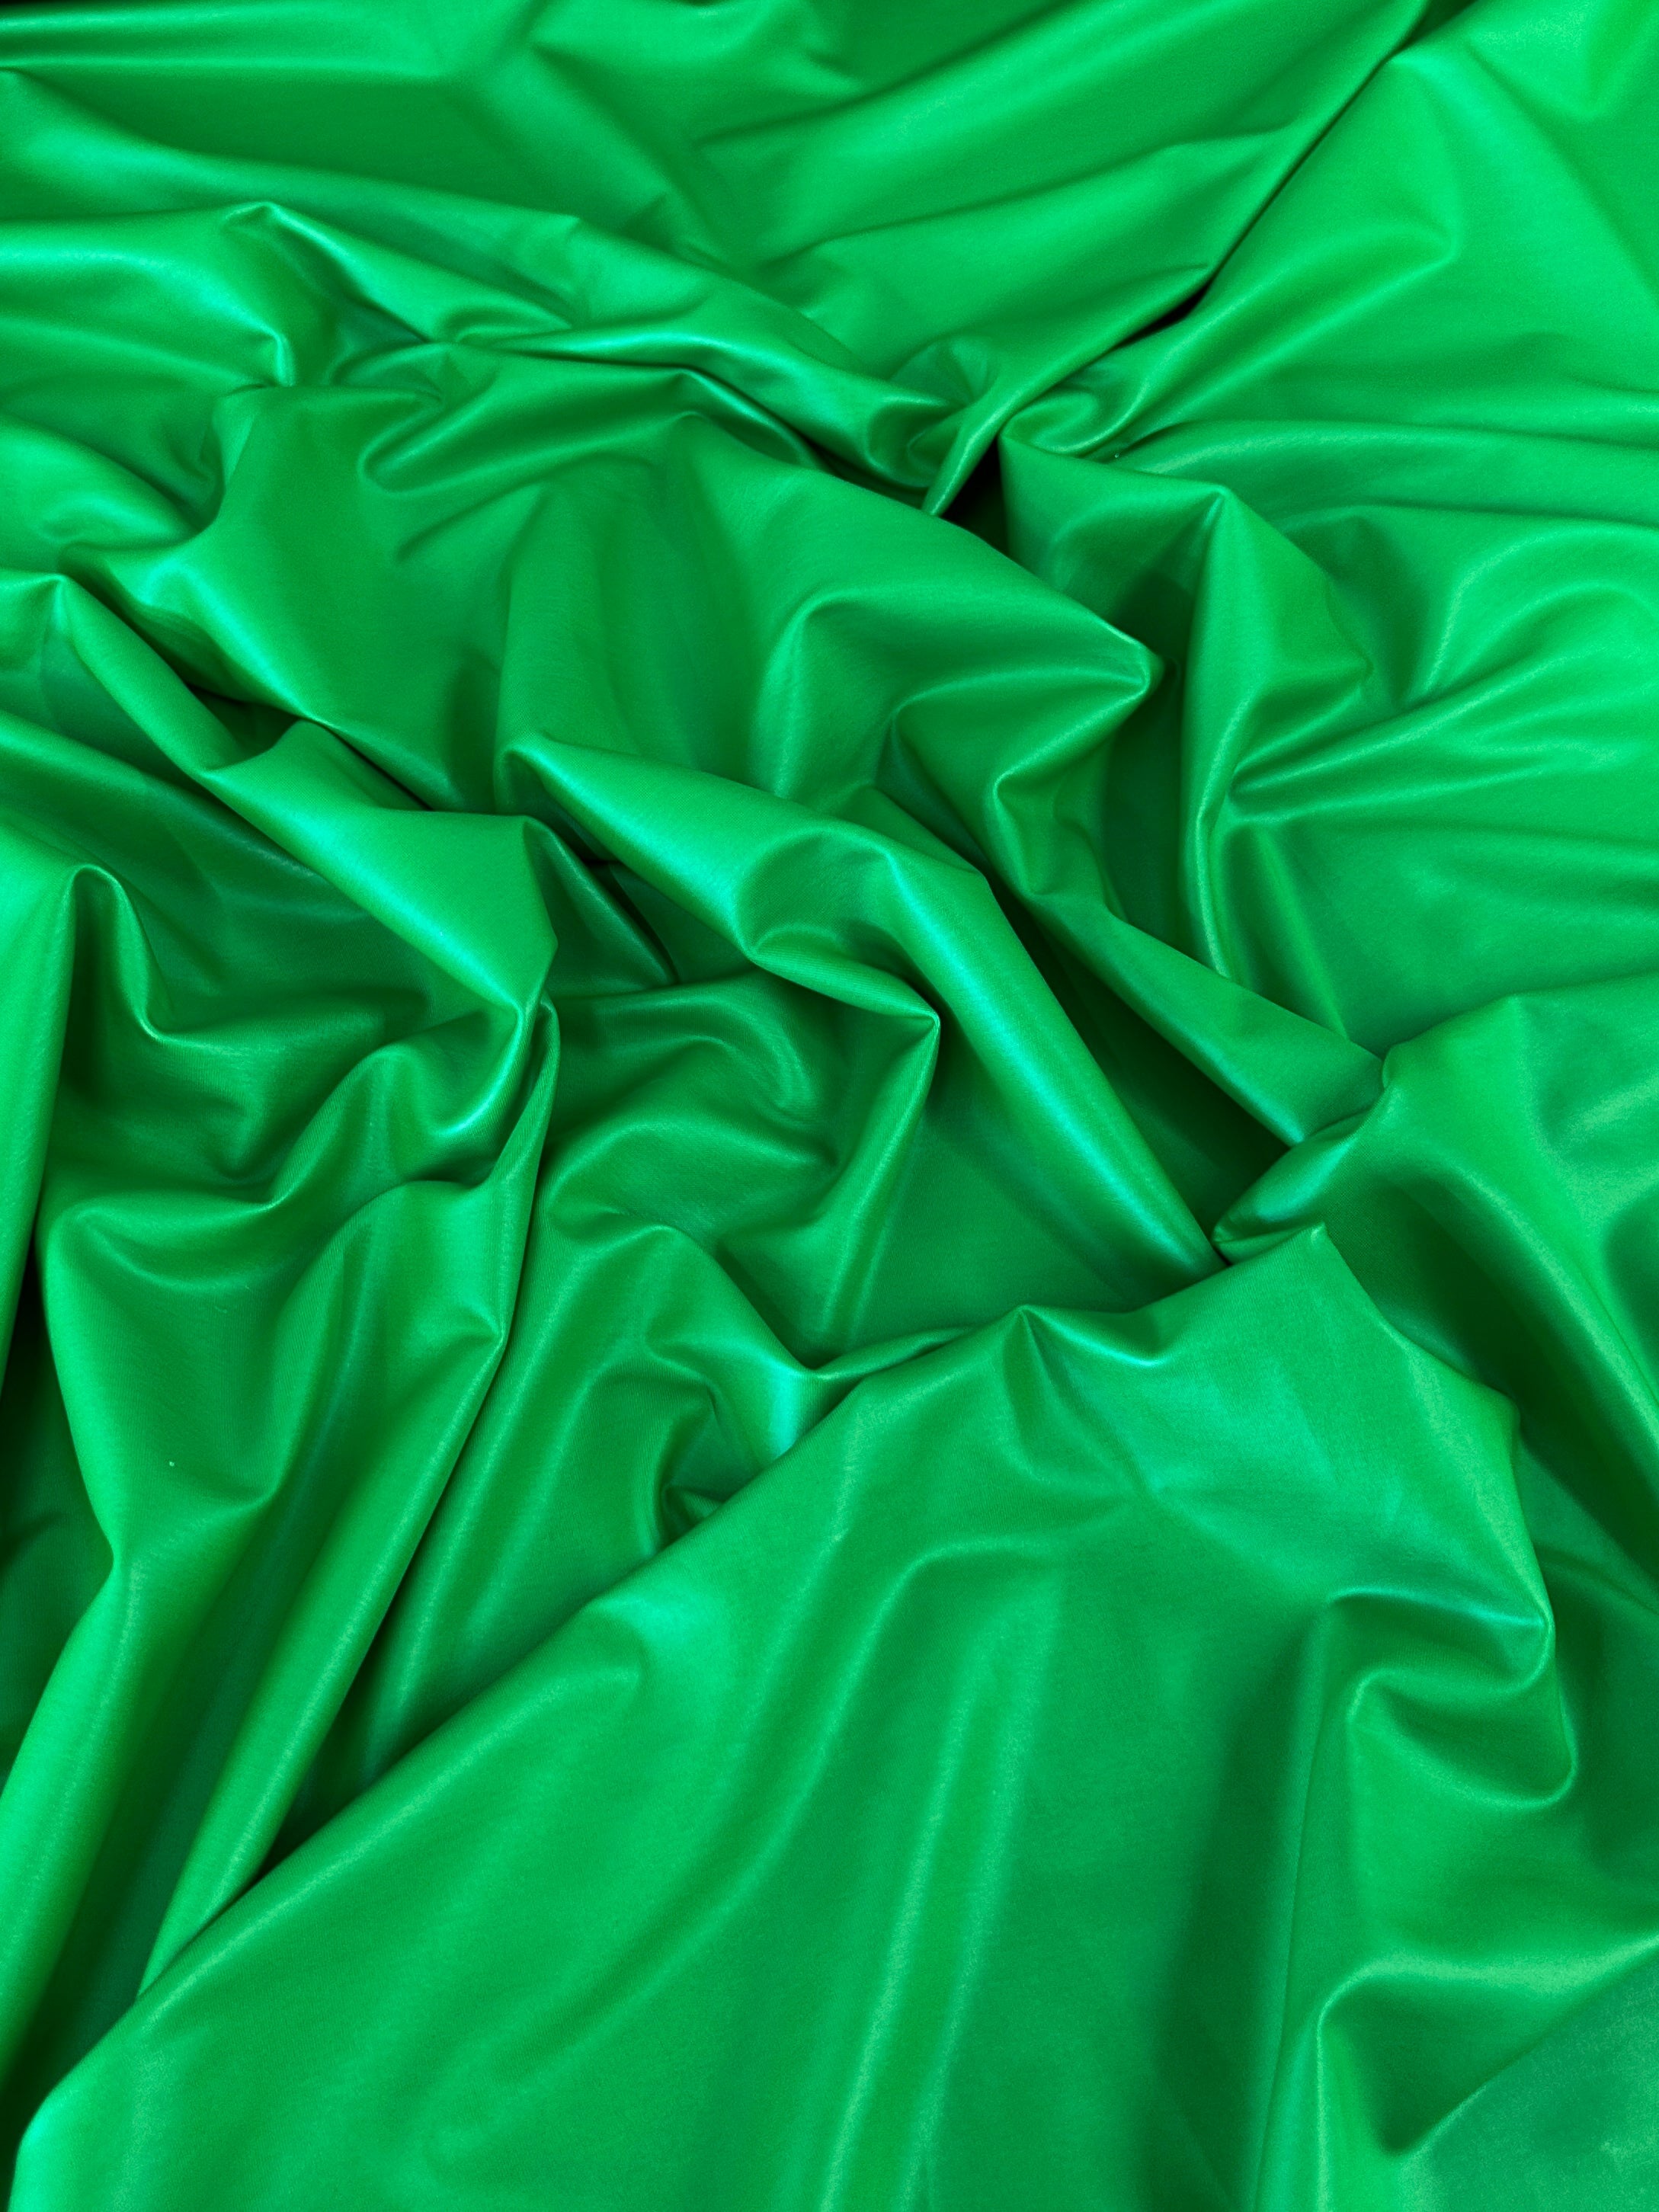 kelly green all way Stretch Faux Leather, green all way stretch leather, shiny faux leather, light green all way stretch faux leather for woman, faux leather for costumes, faux leather for home decor, 2 way stretch faux leather, leather for blazers, cheap leather, discounted leather, leather on sale